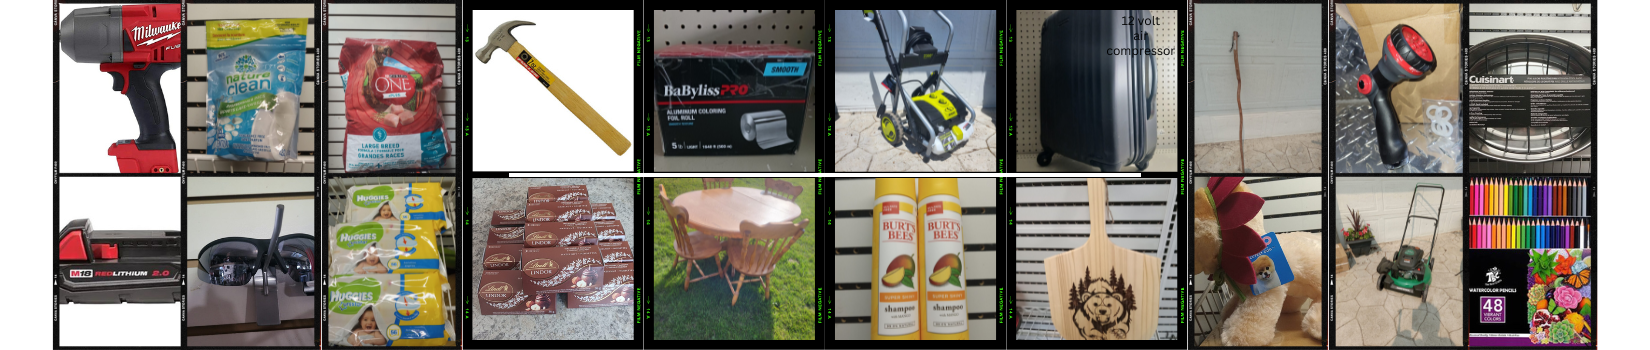 Zehr's Sales June 22nd Lawn Mower, Equipment, Tools Hardware and Much More